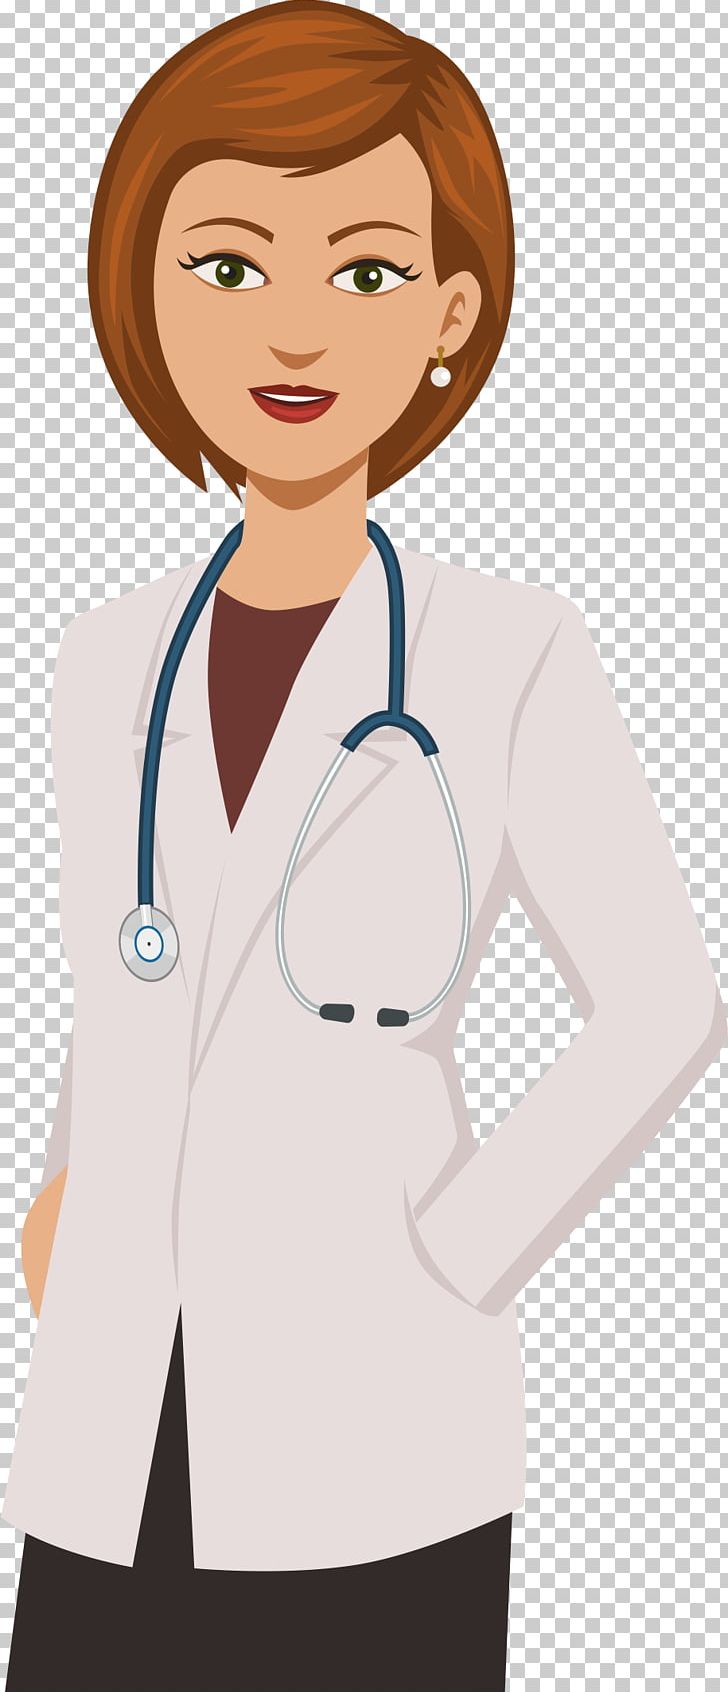 Color pencil drawing of pictograph female doctor Vector Image